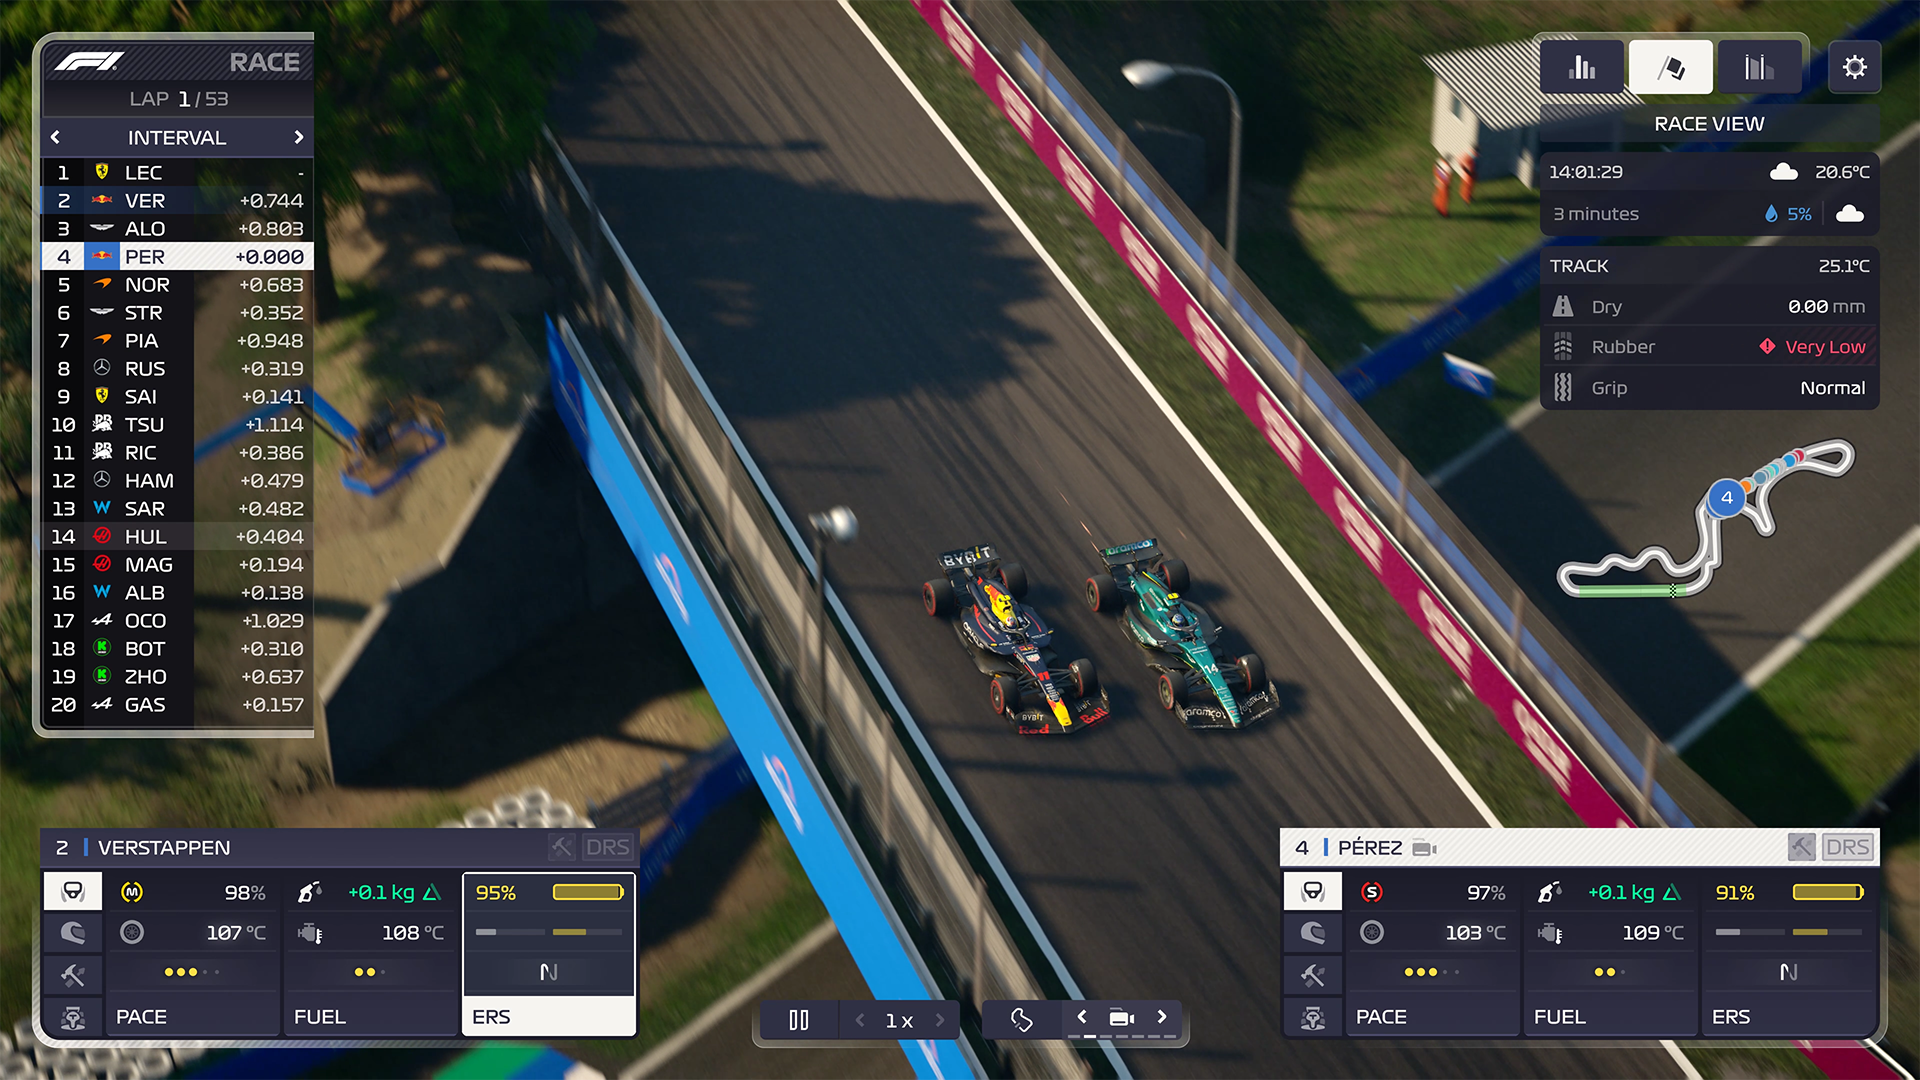 F1 Manager 24